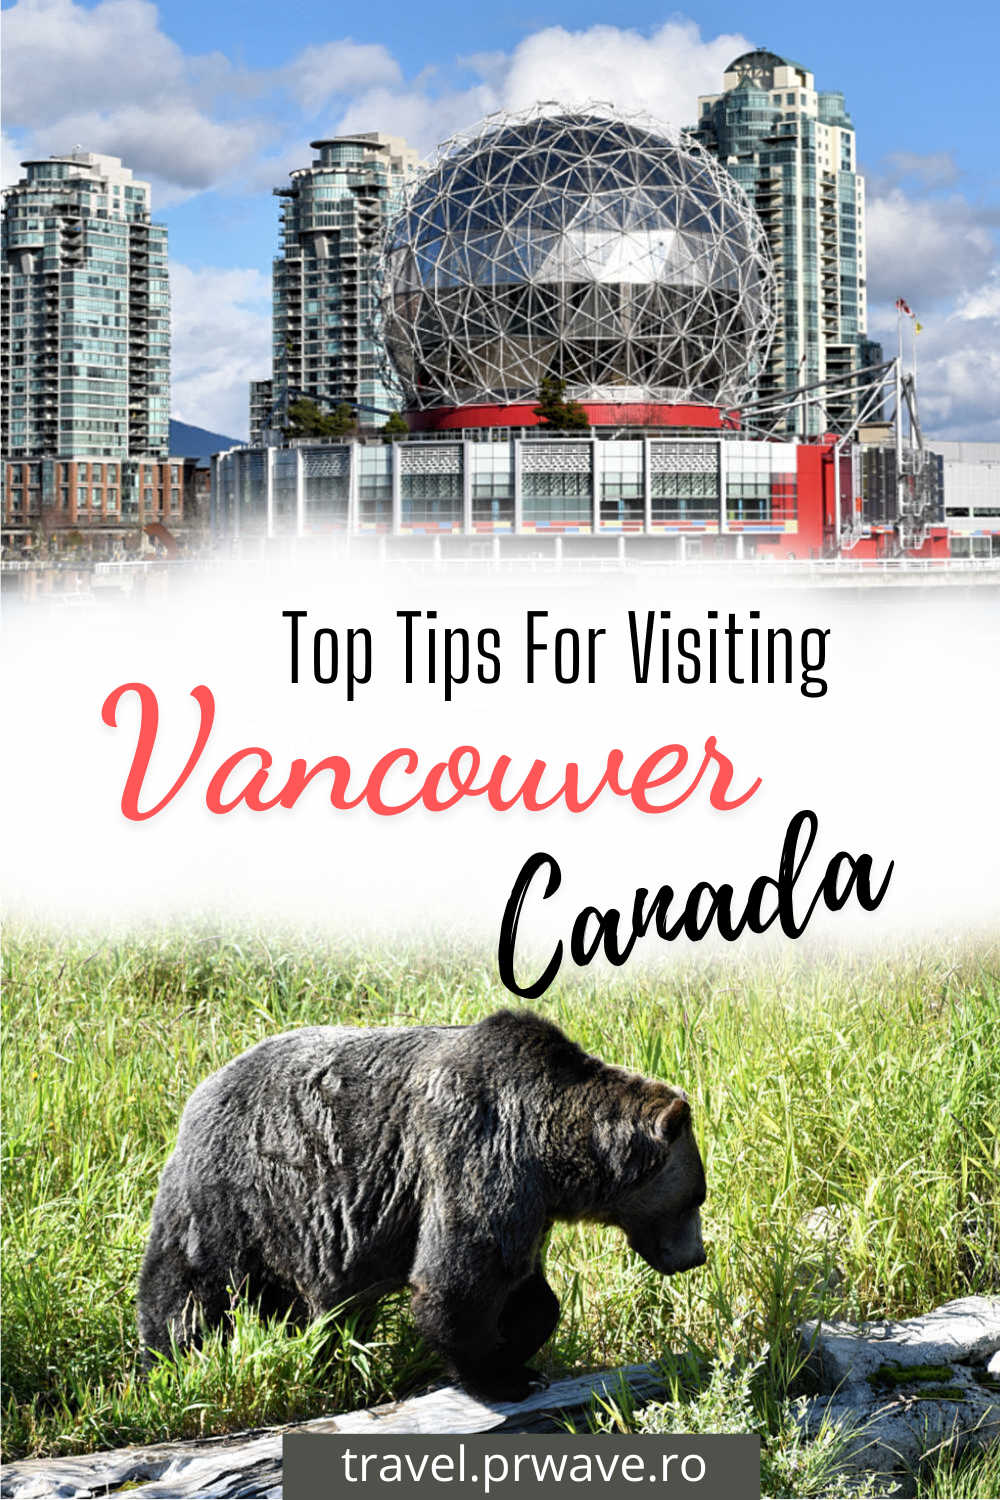 Tips for visiting Vancouver, Canada and the best Vancouver attractions. Discover that to see and do in Vancouver, Canada from this Vancouover local'd guide. #vancouver #canada #vancouverthingstodo #northamerica #traveldestinations #vancouverguide